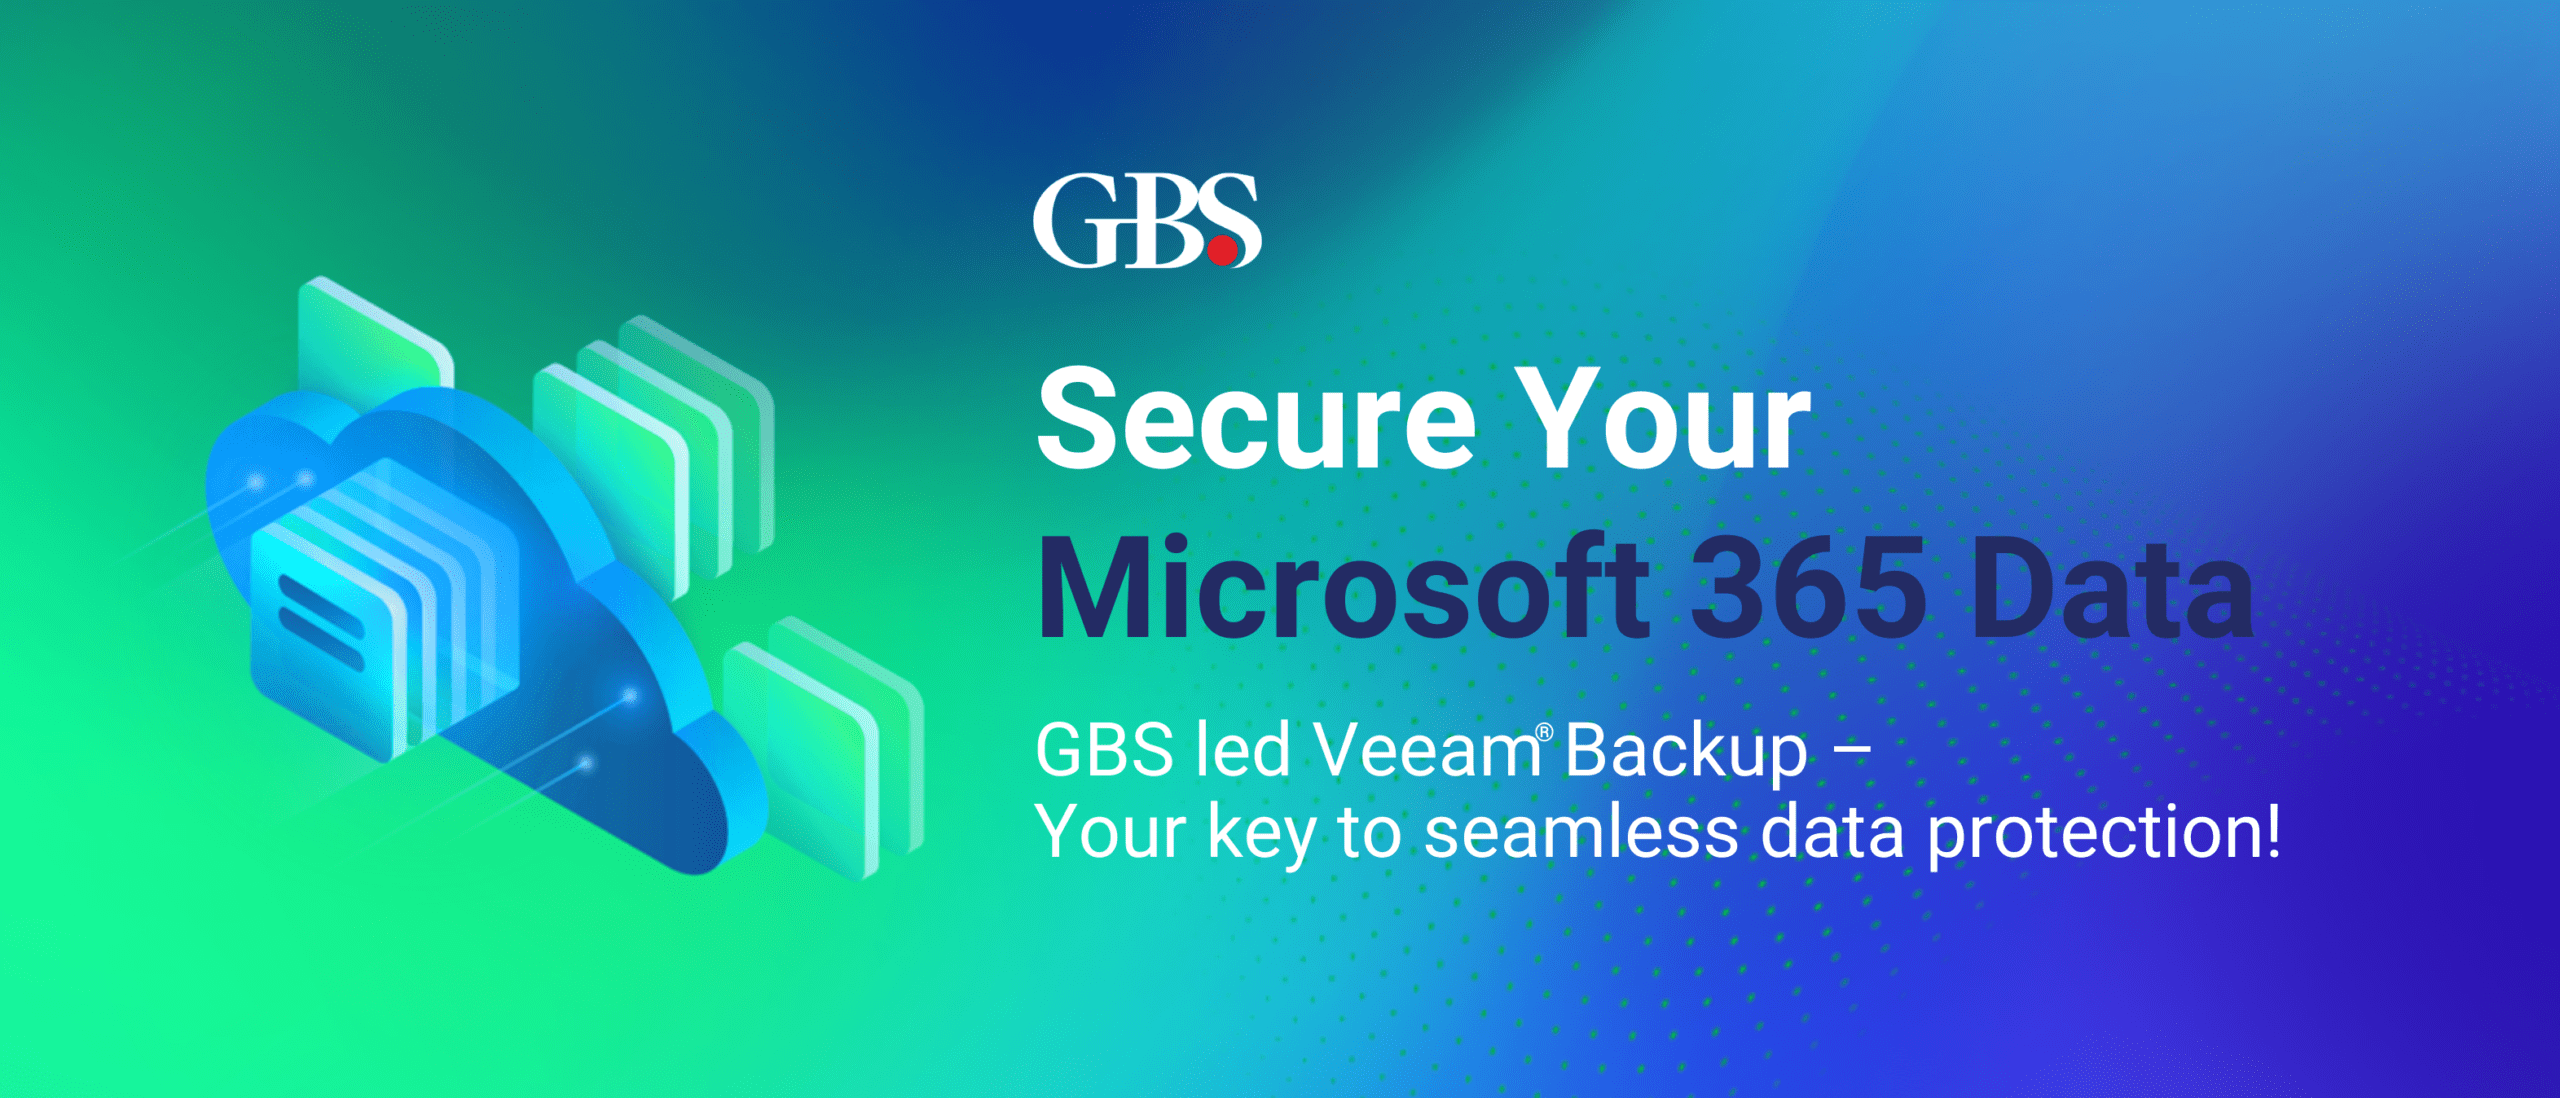 Image for BLOG 3 Jan 24 - Fortify Your Business A Deep Dive into Veeam Backup for Microsoft 365 by Global Business Solutions!